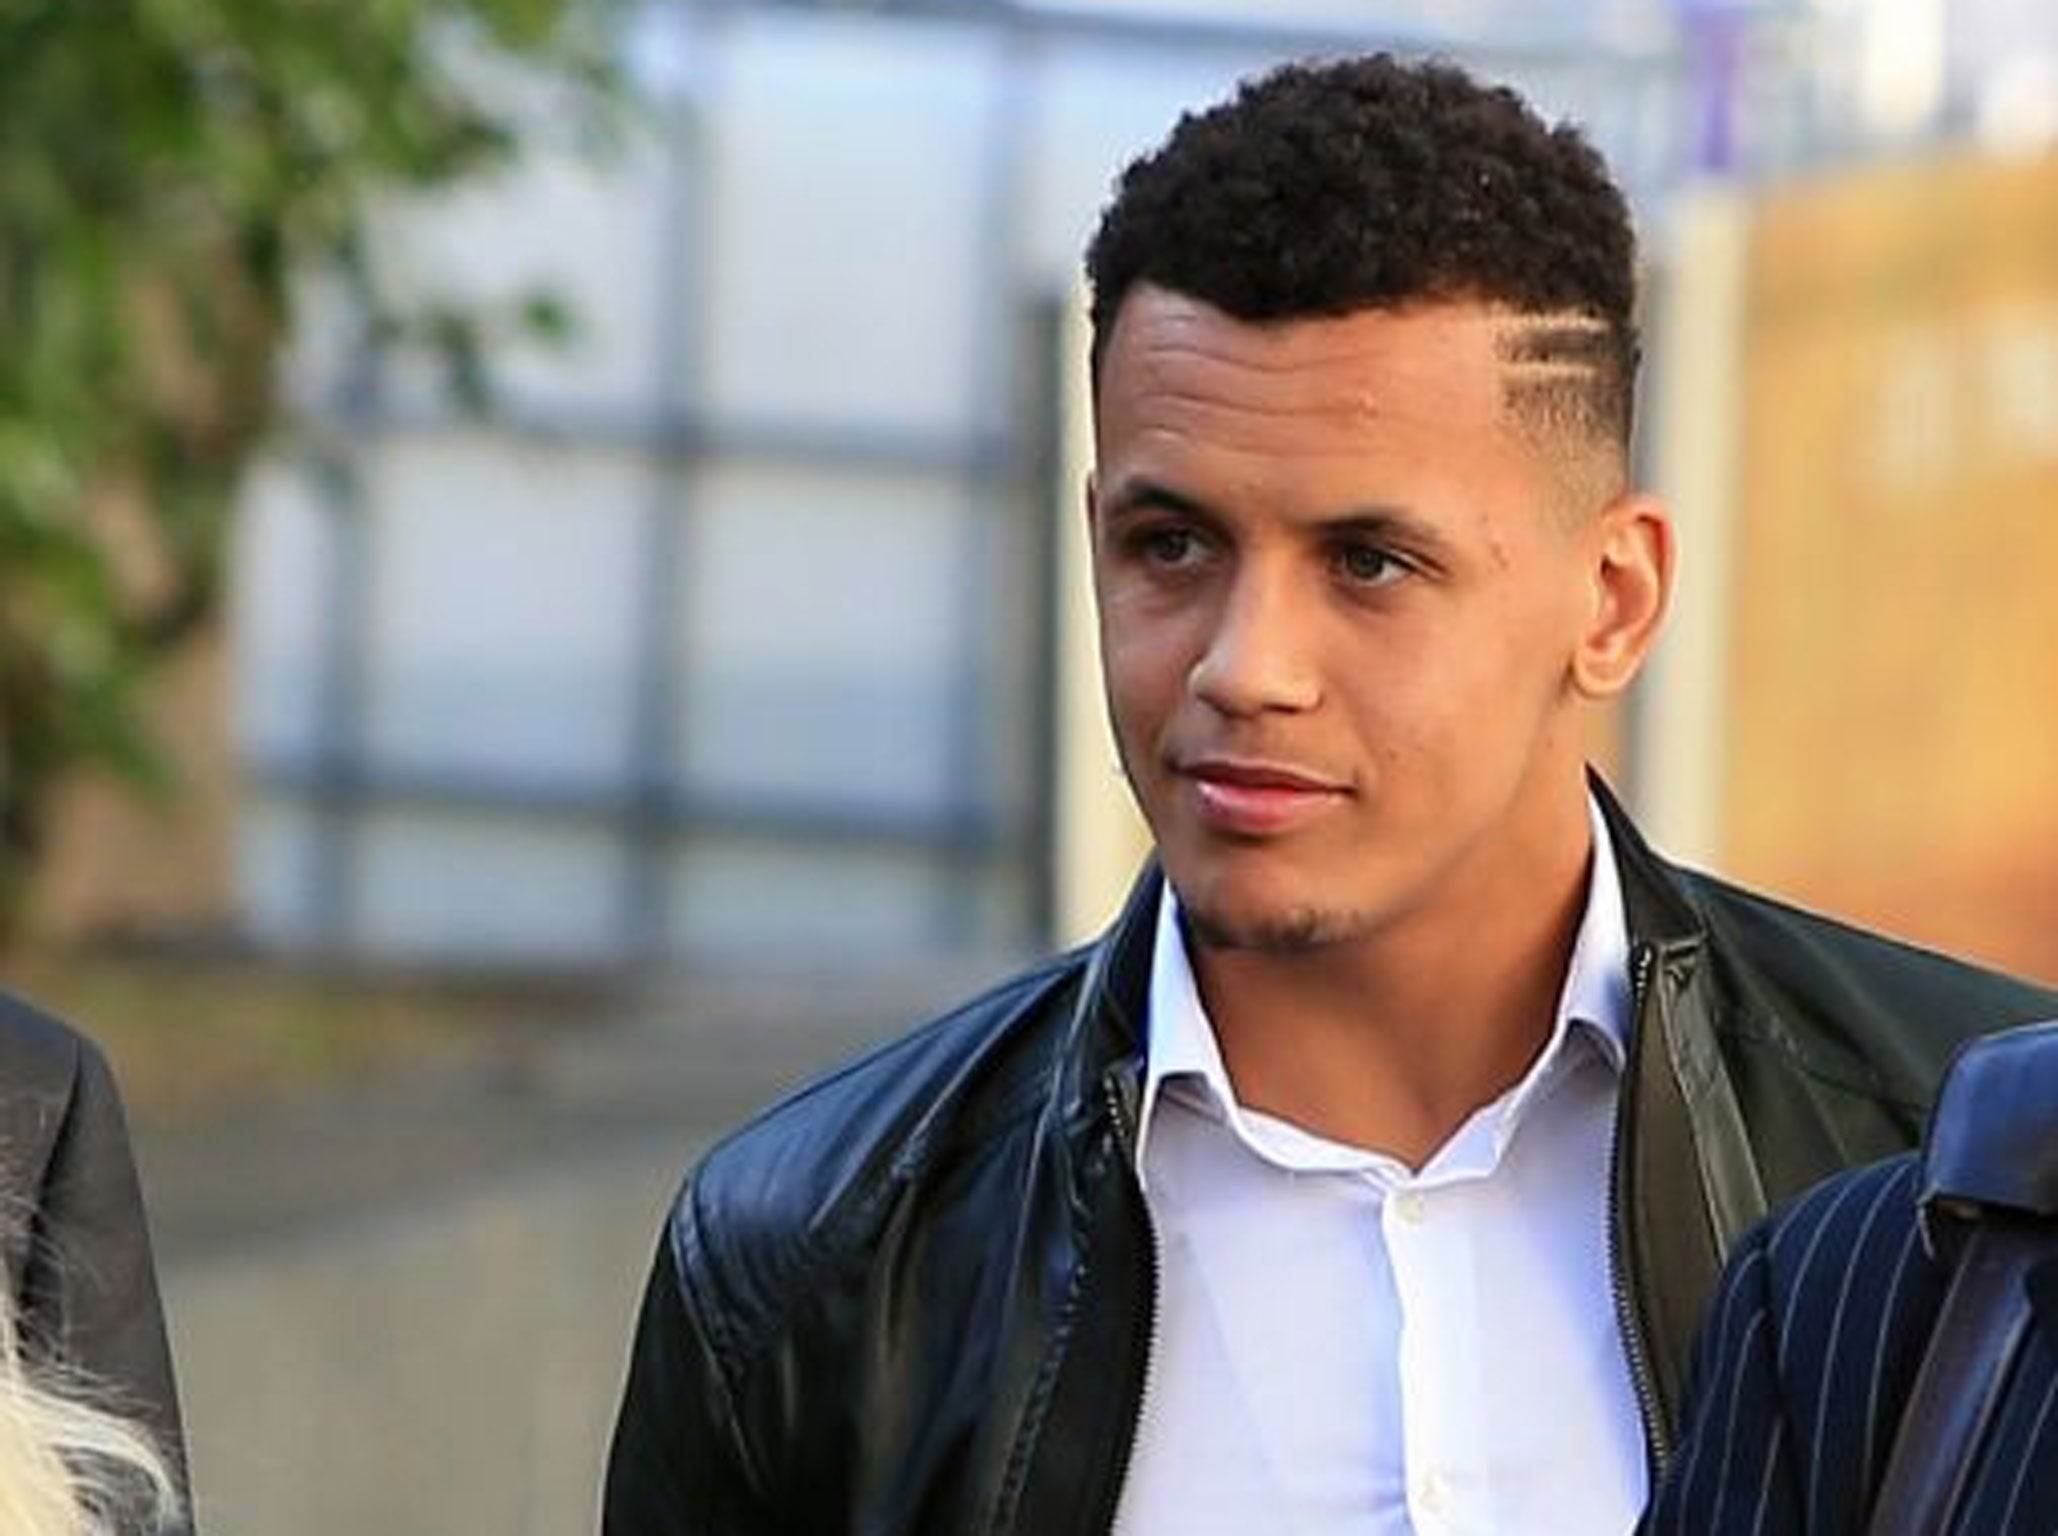 Premier League footballer Ravel Morrison arrives at Manchester Crown Court where he faces charges of assault on his ex-girlfriend.